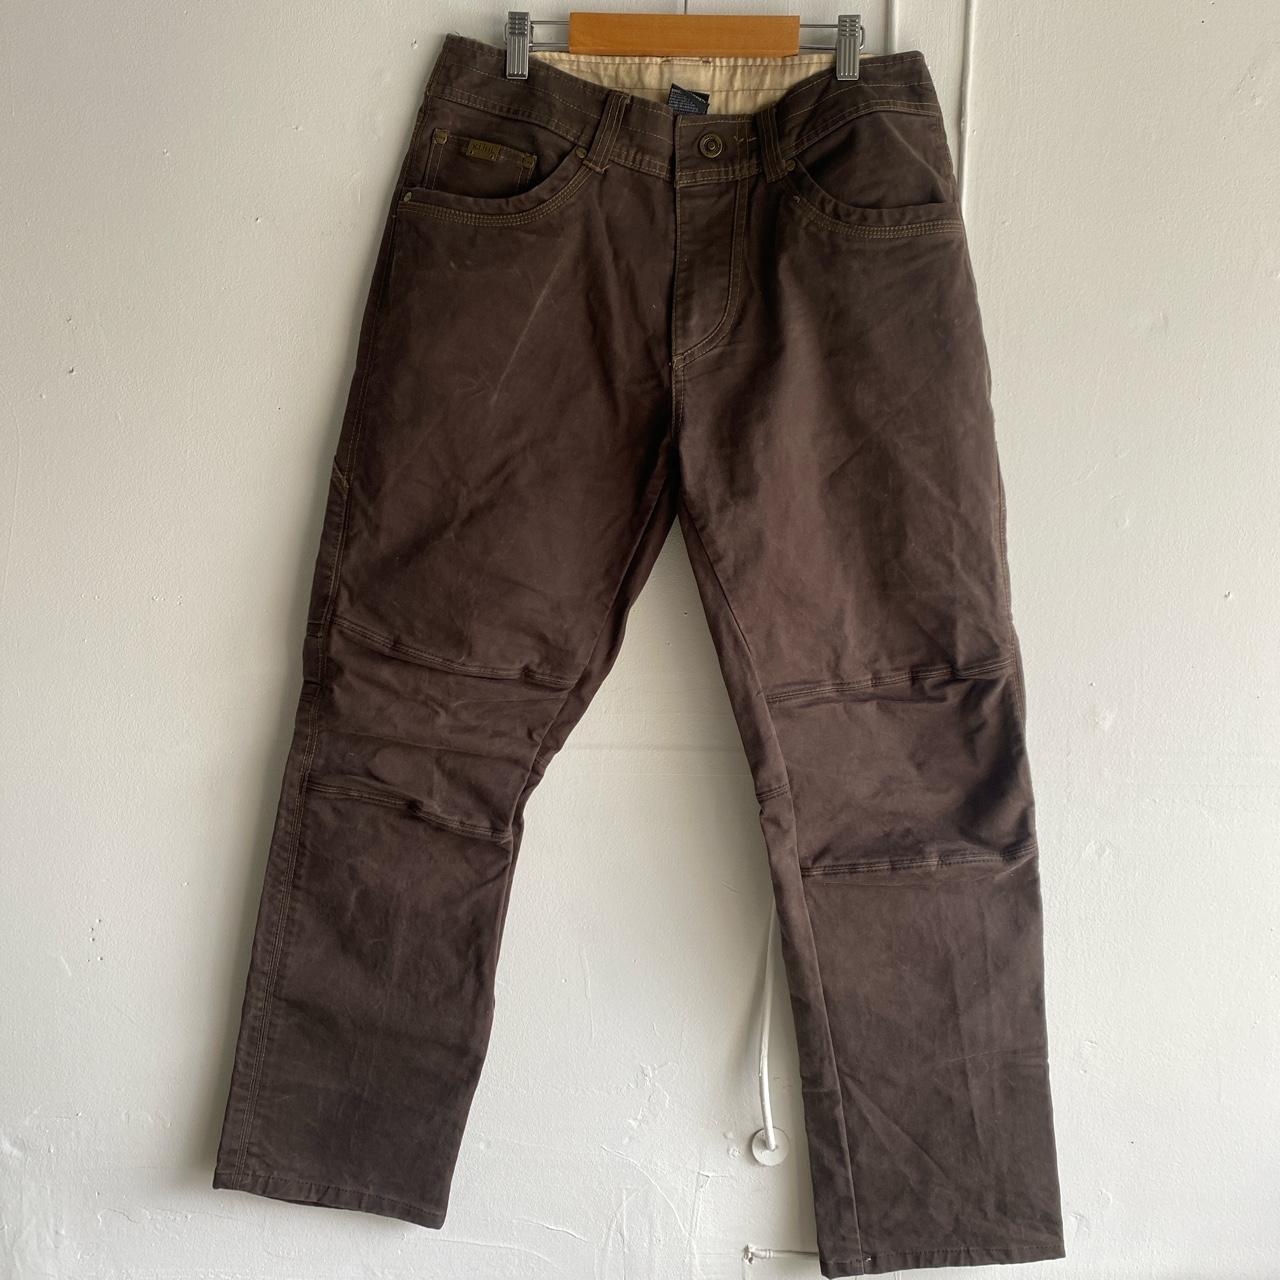 Kuhl vintage patina dyed outdoor’s pant’s in a mocha... - Depop